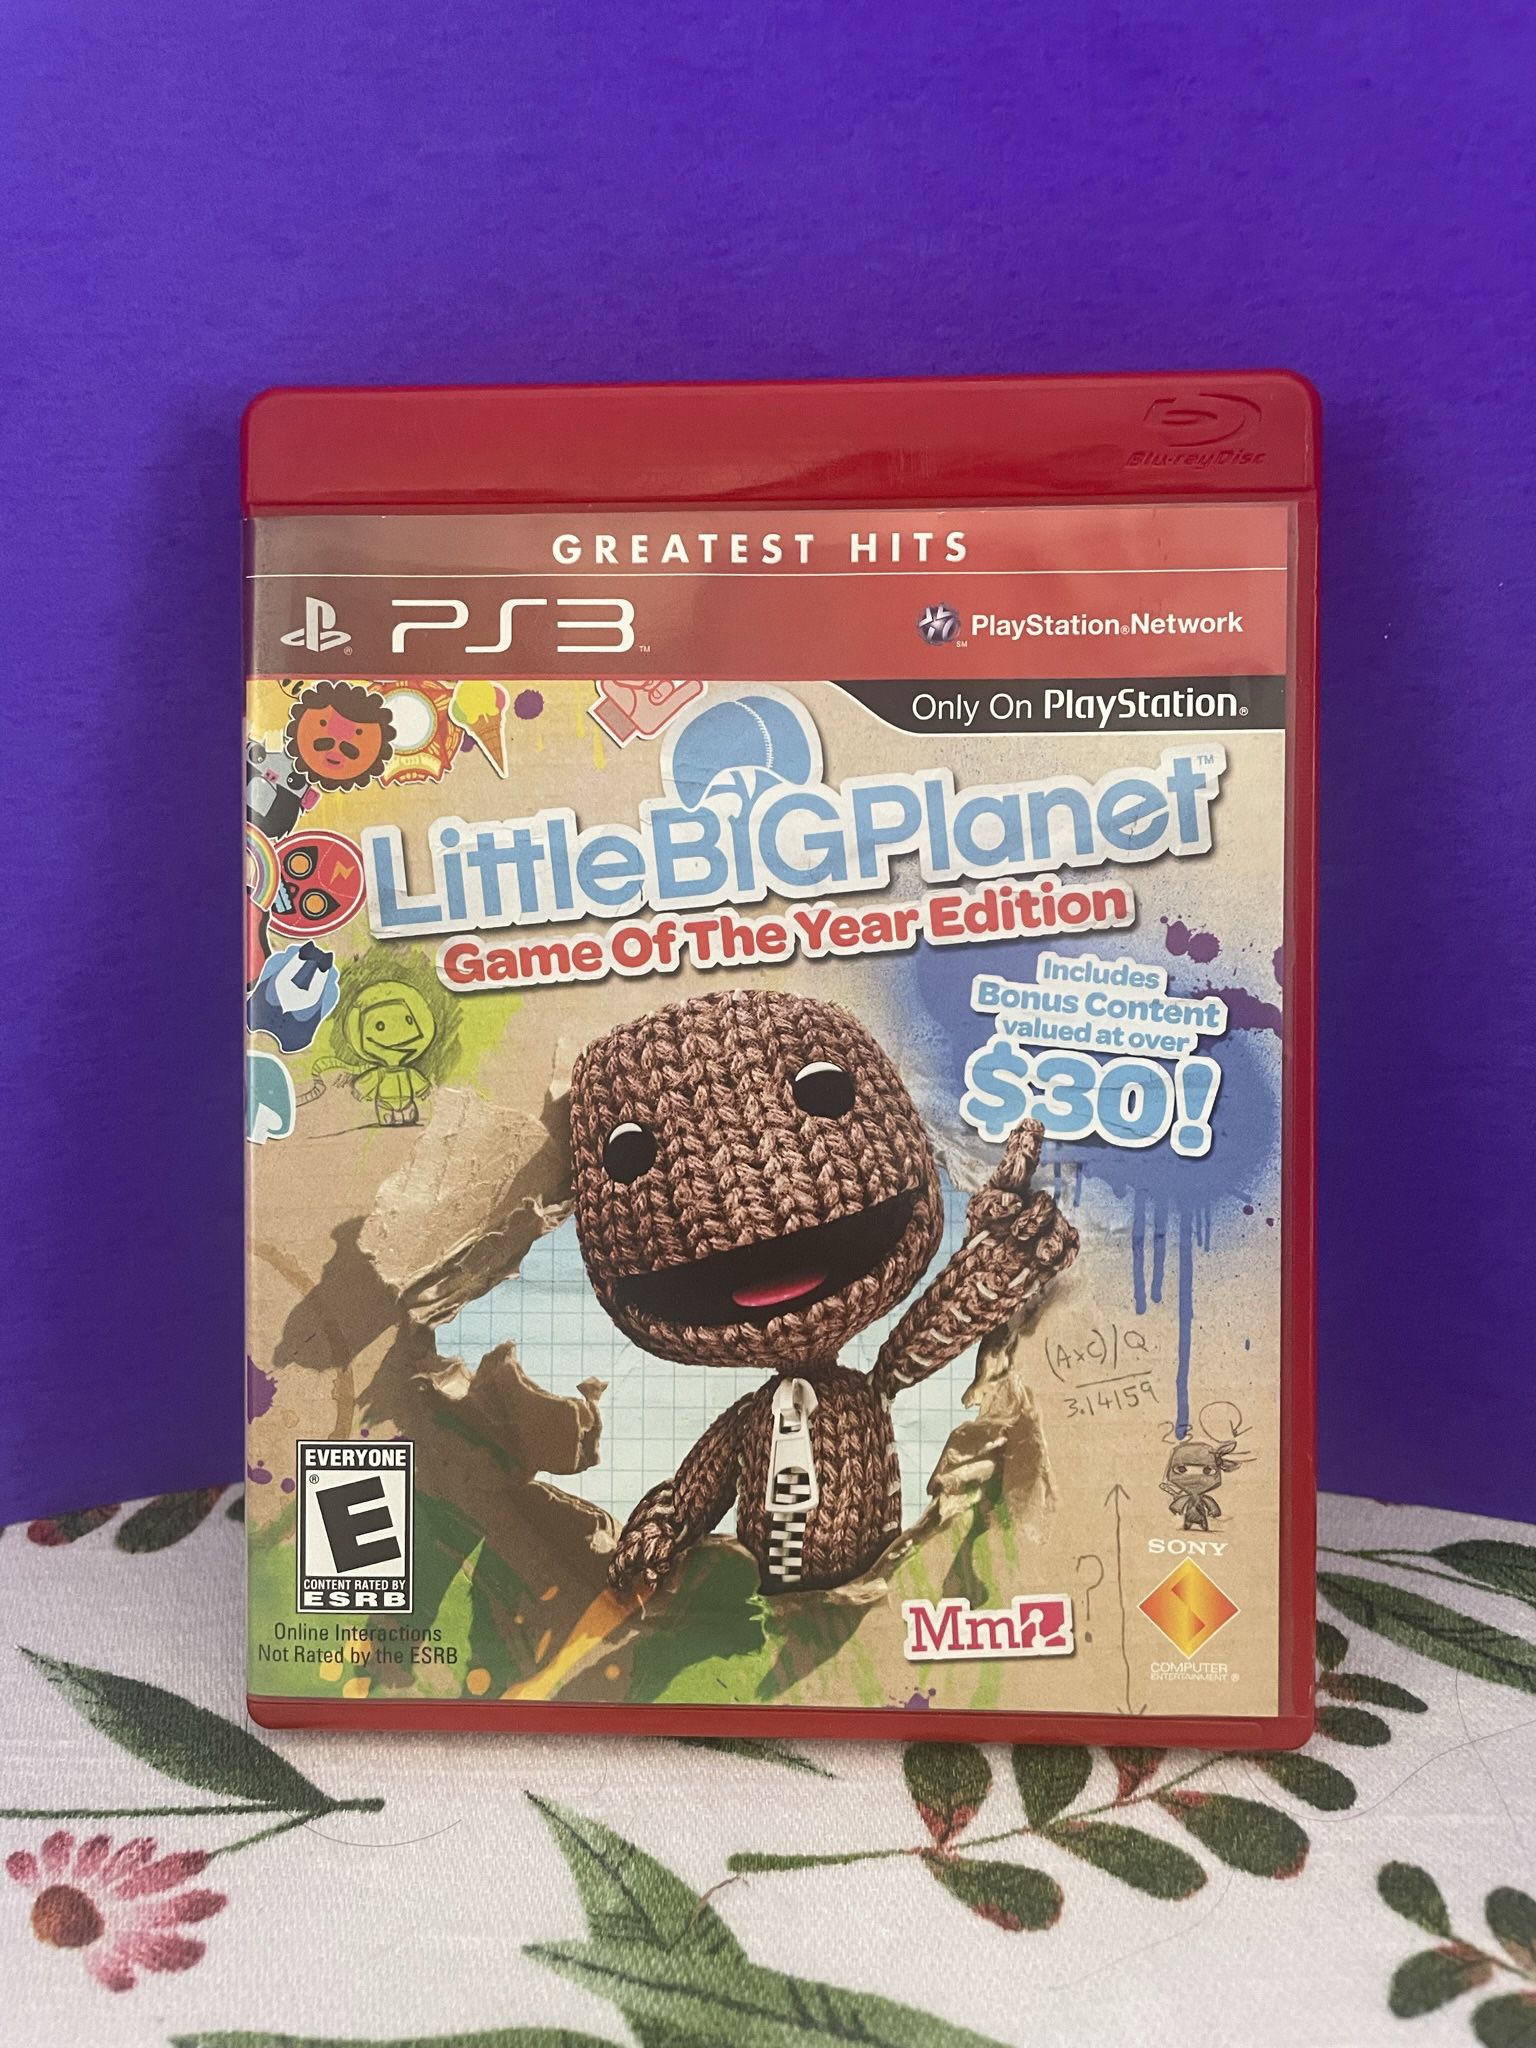 Little Big Planet GOTY Edition for the PS3